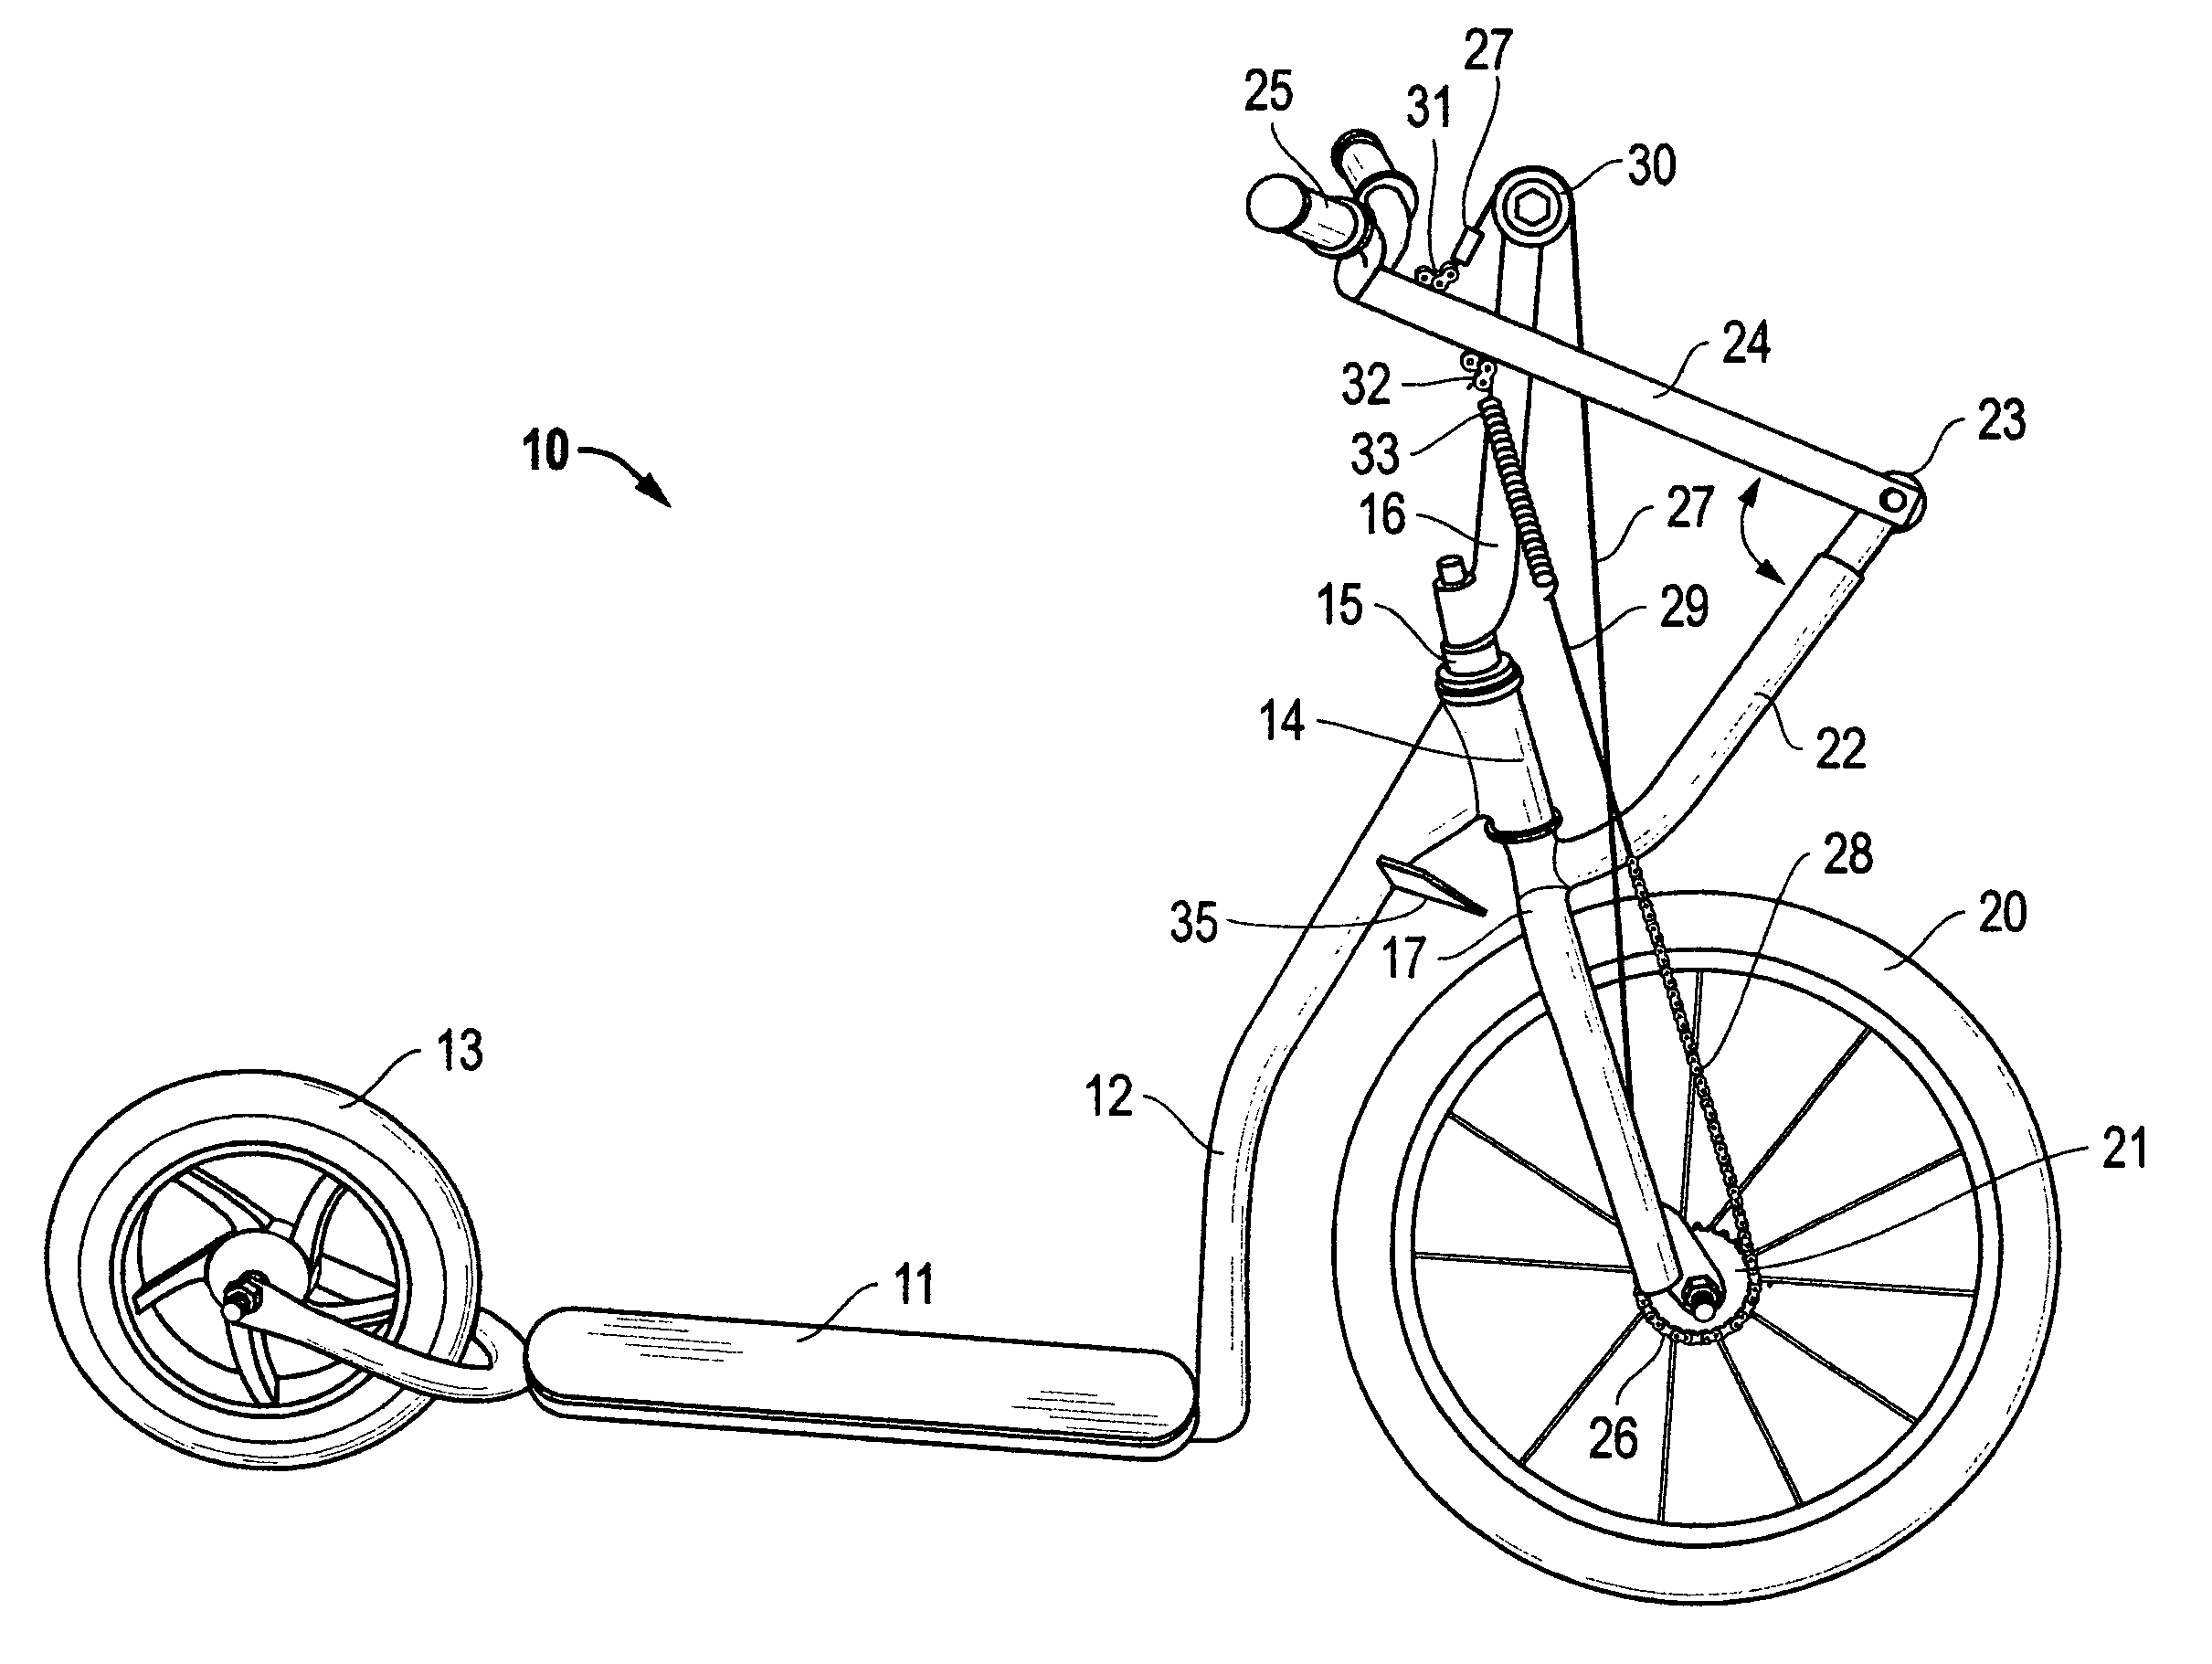 Apparatus for hand propulsion and steering of a scooter, tricycle or bicycle